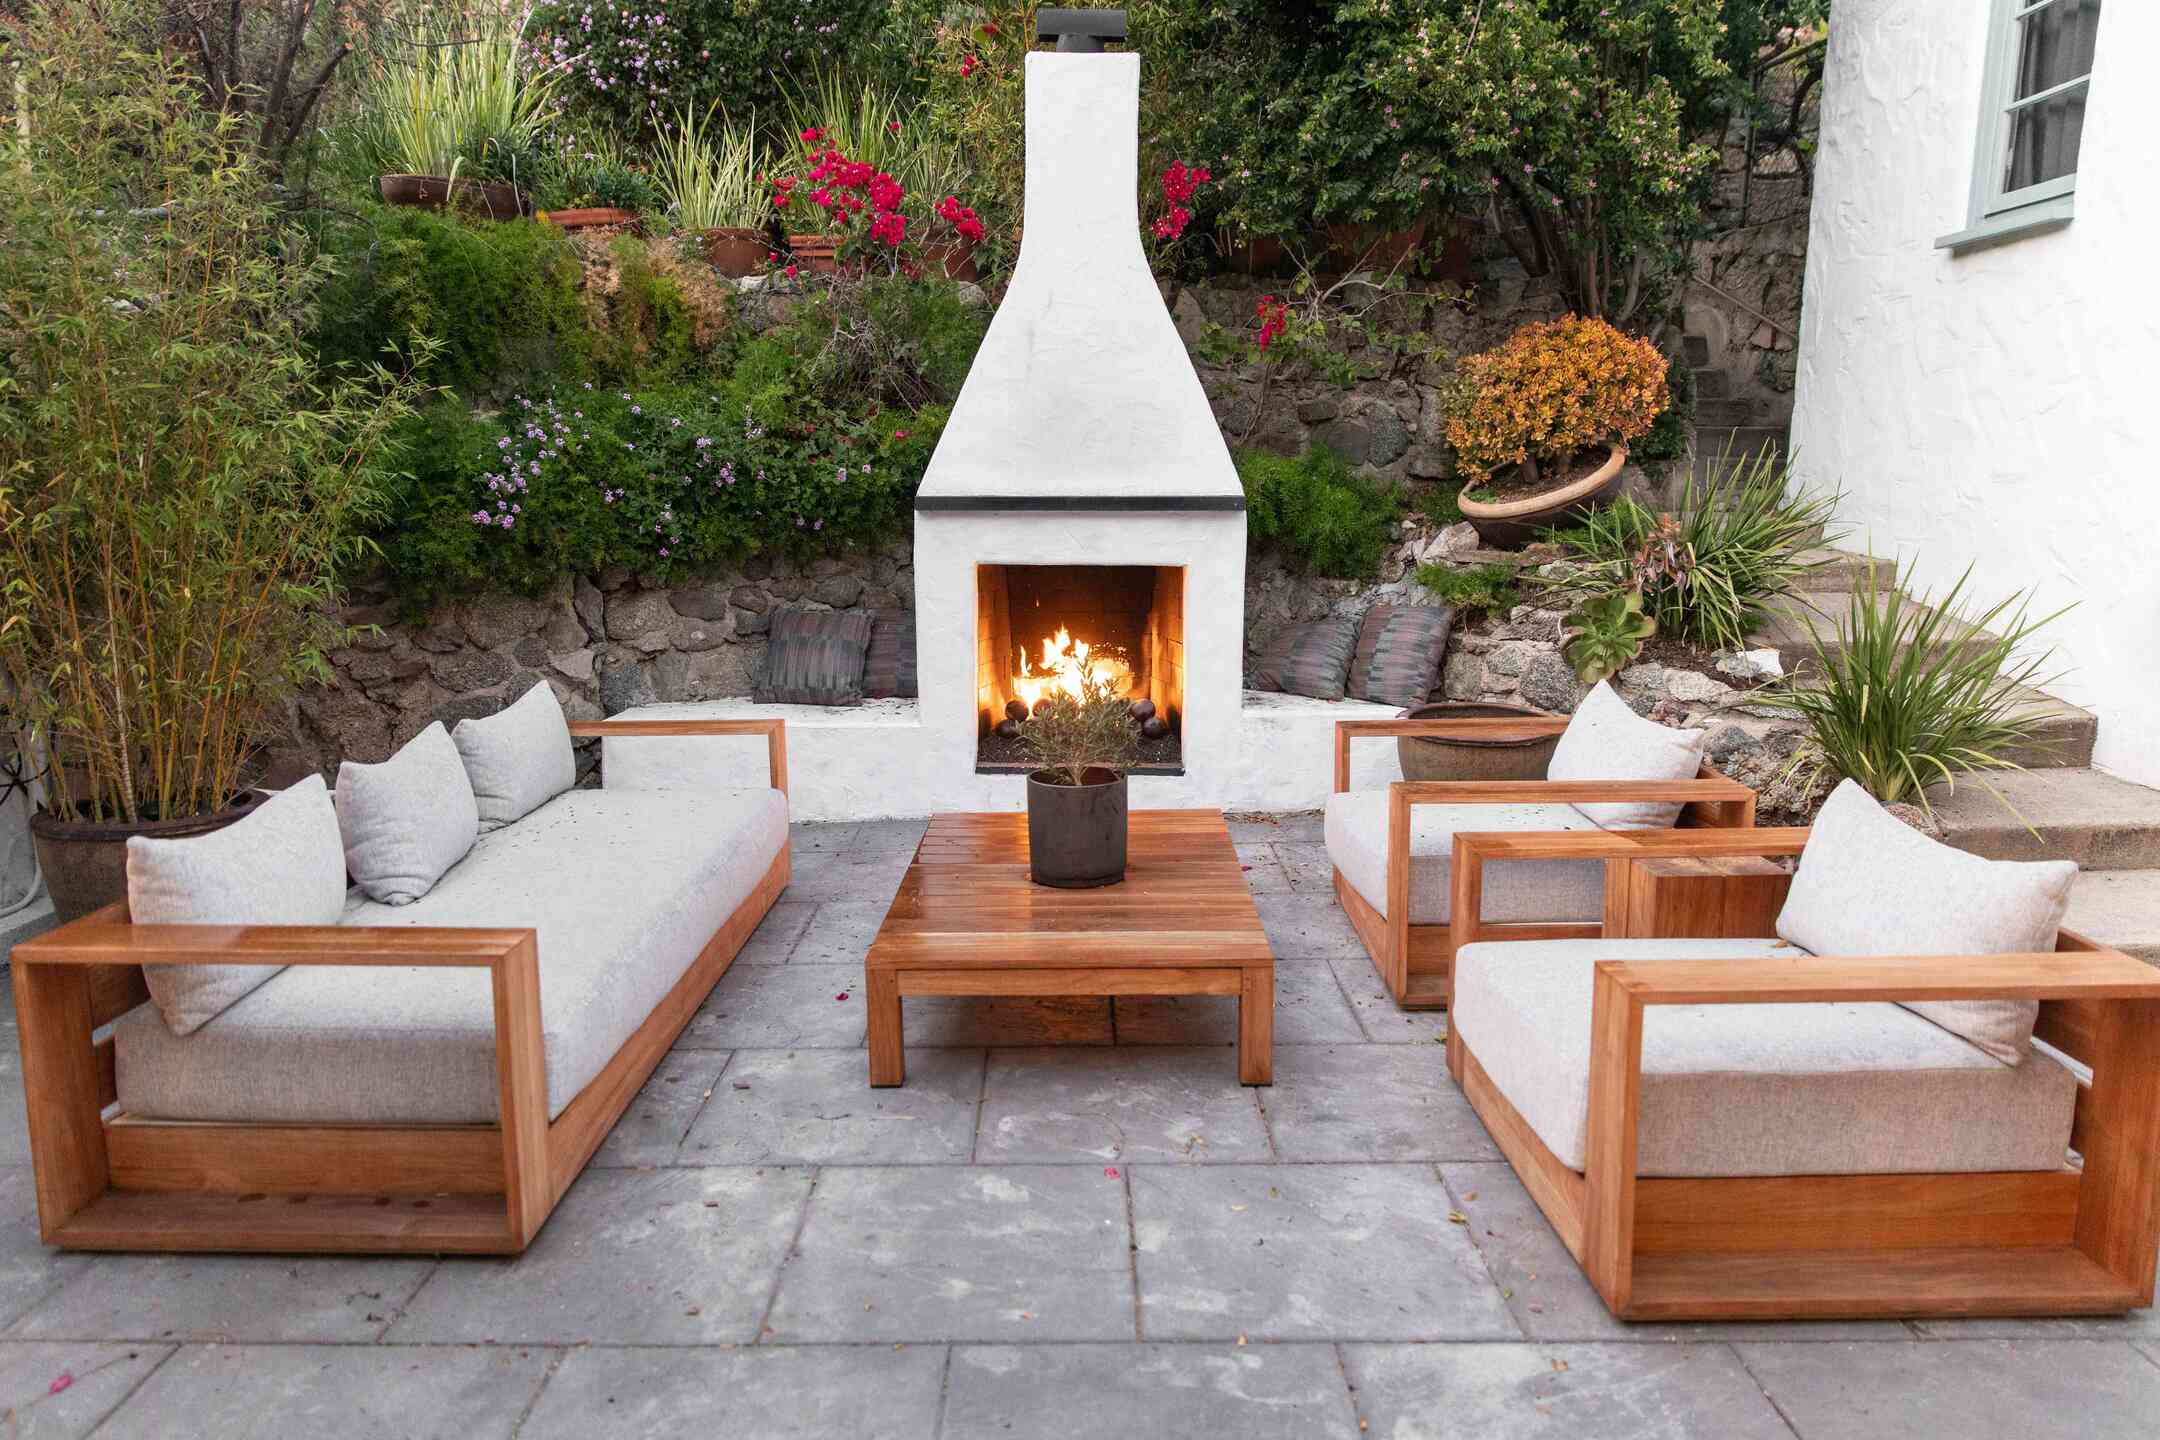 How To Build An Outdoor Gas Fireplace